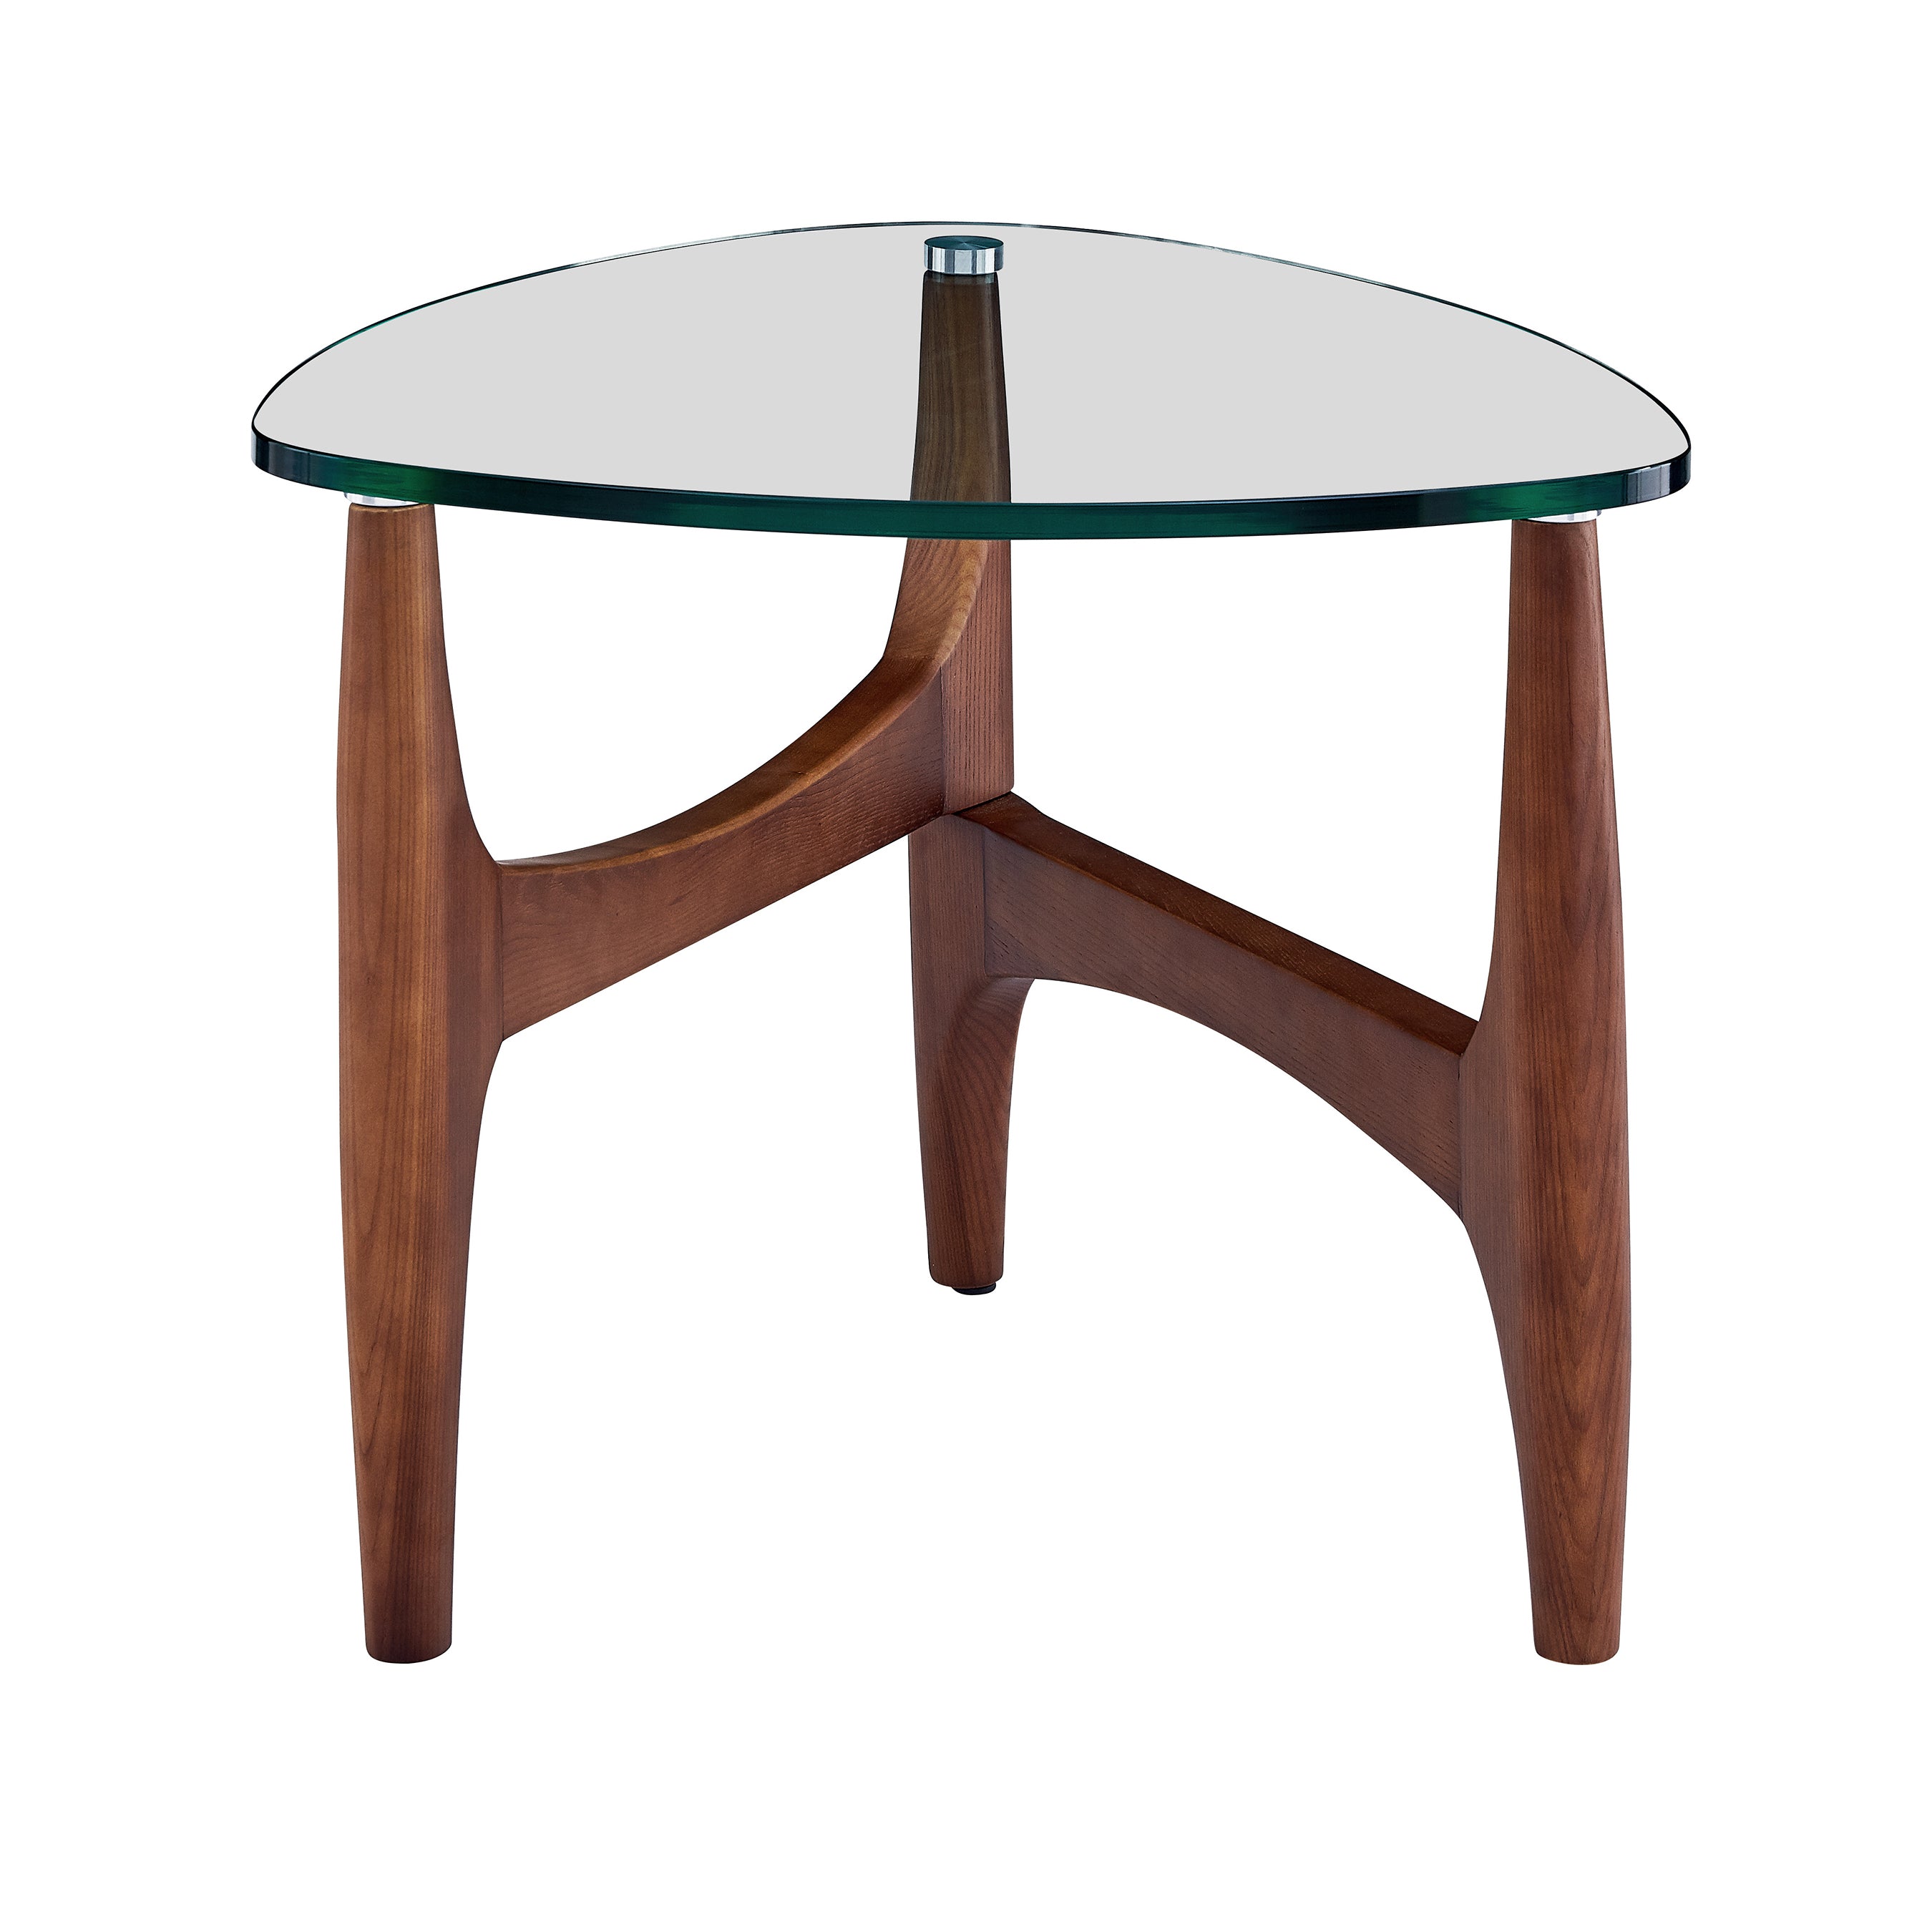 Ledell 24" Side Table - What A Room